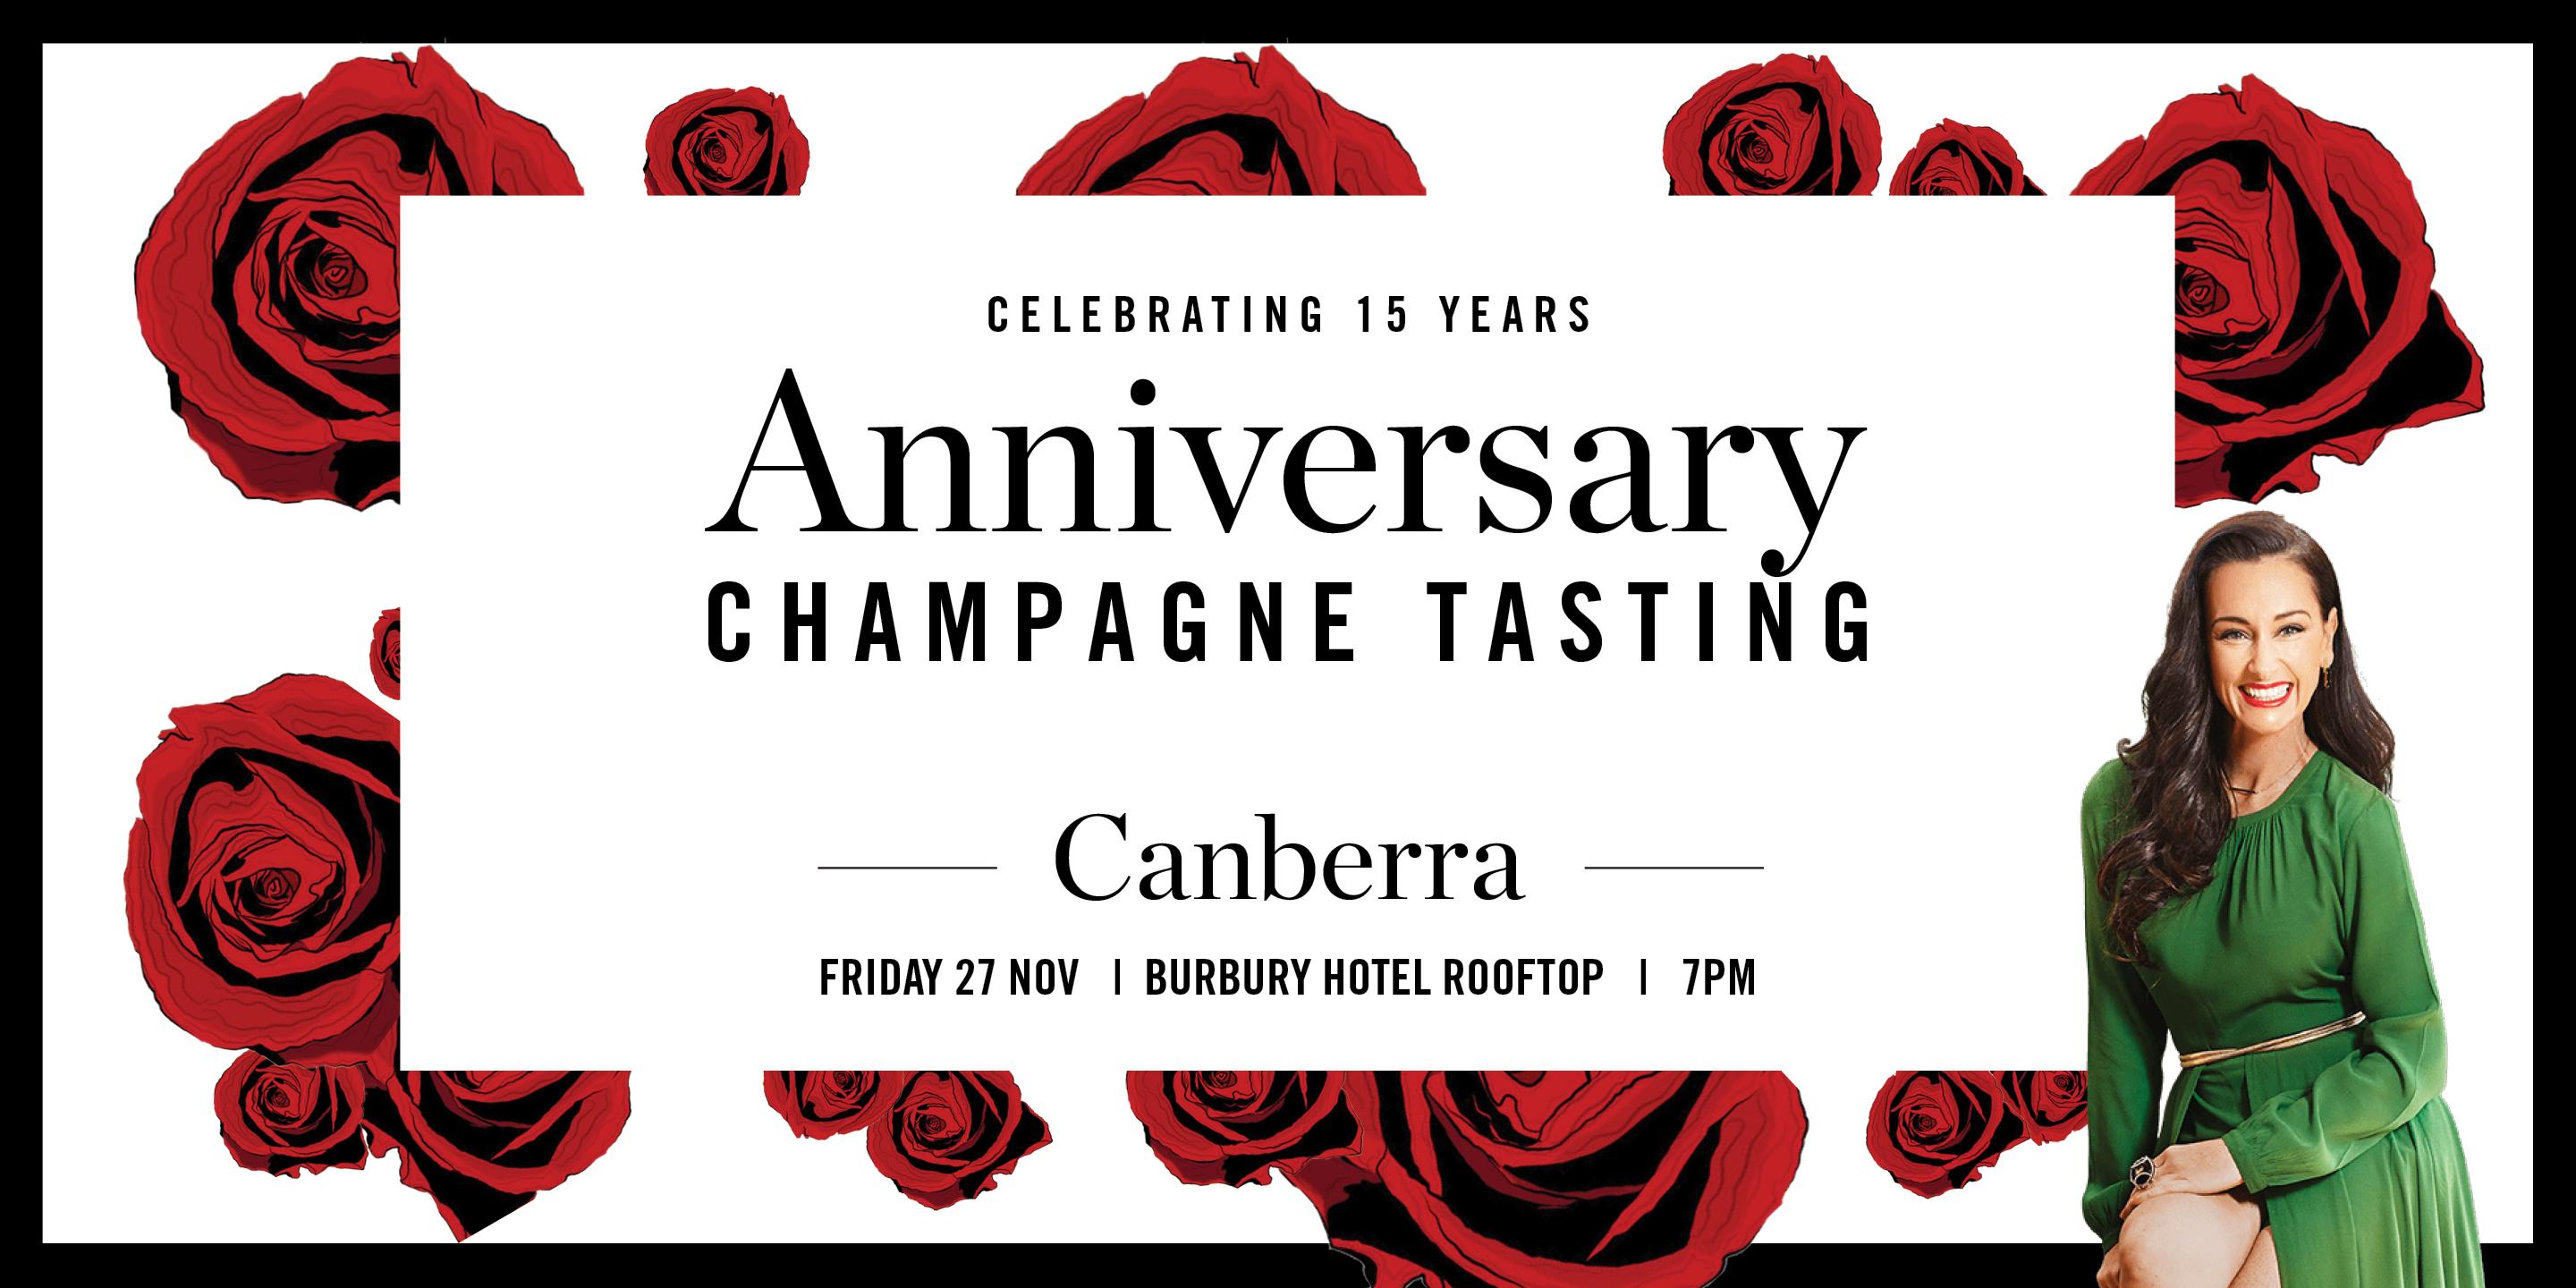 Canberra Champagne Tasting - 15 Year Anniversary